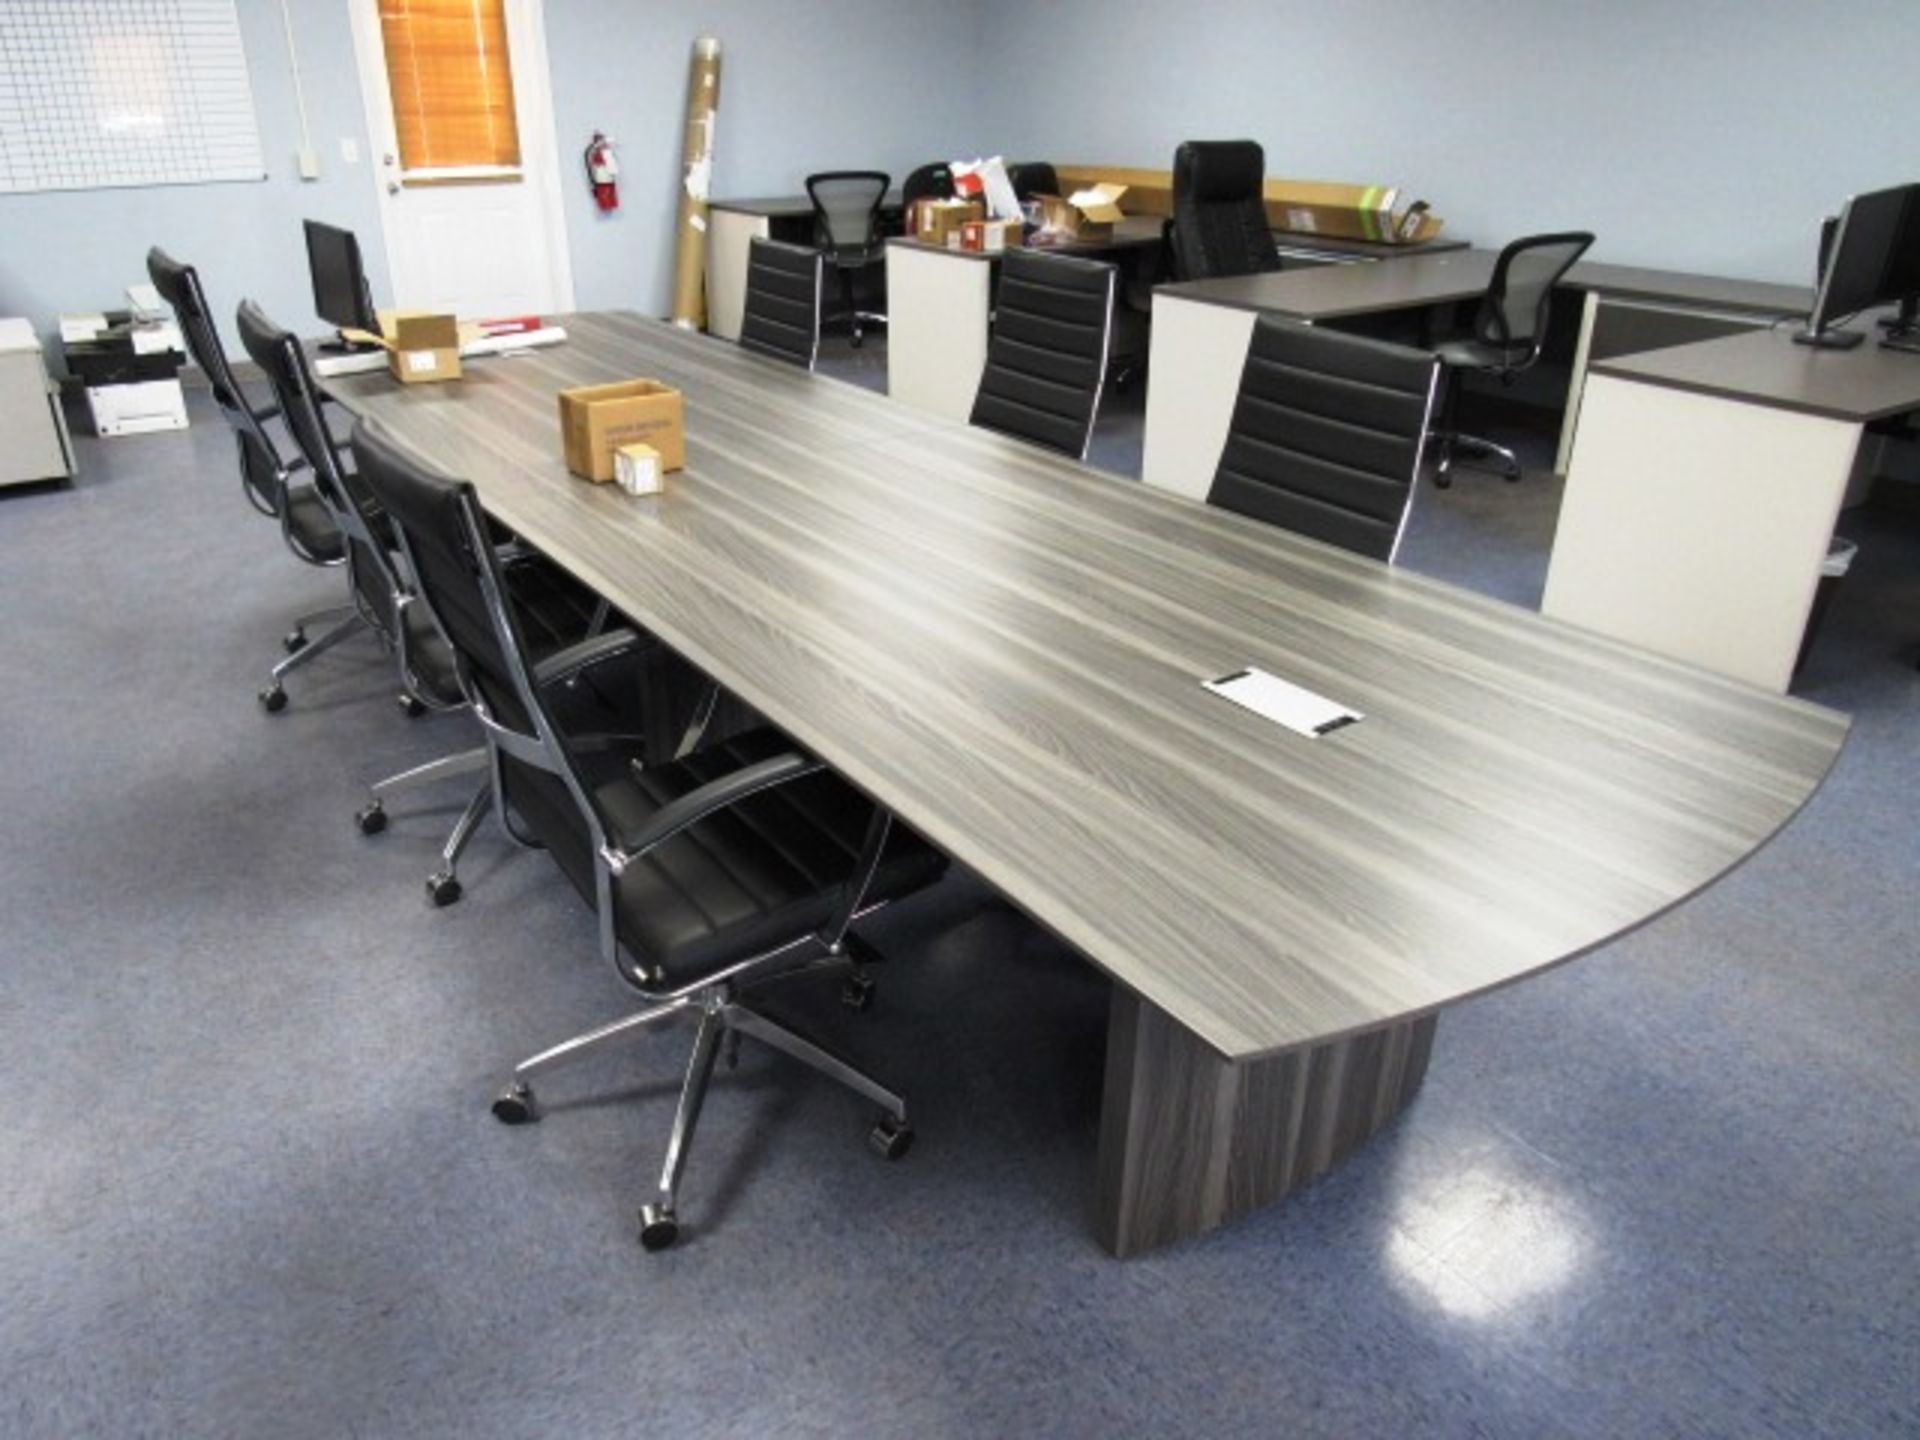 4' x 14' Conference Table with (8) Chairs